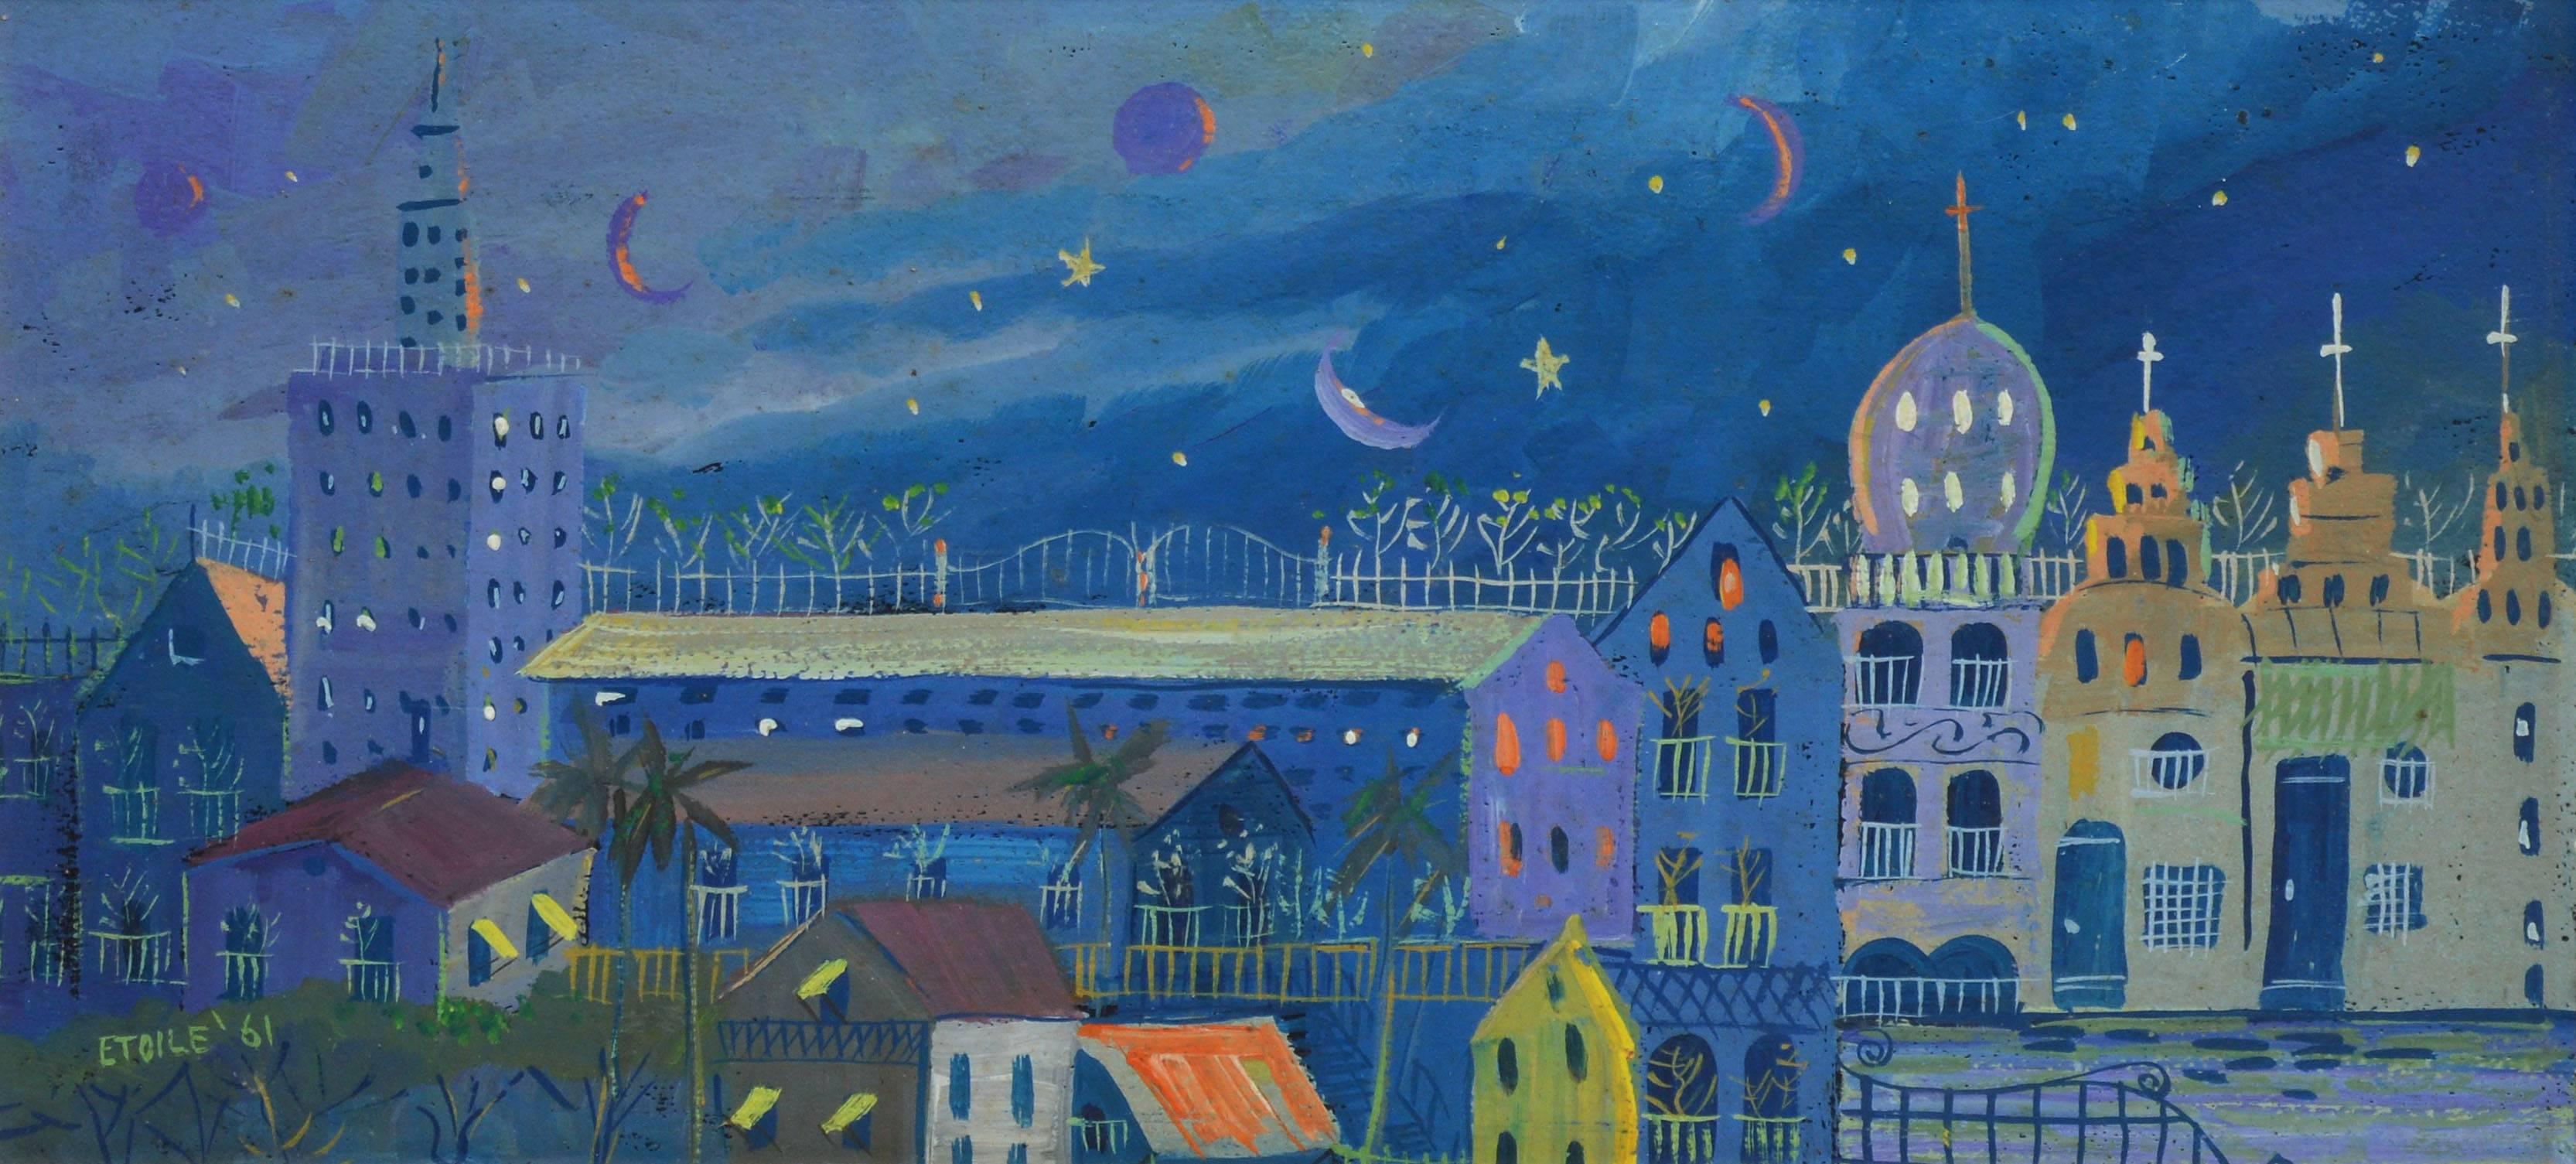 Fauvist Cityscape at Night by Etoile - Modern Painting by Unknown